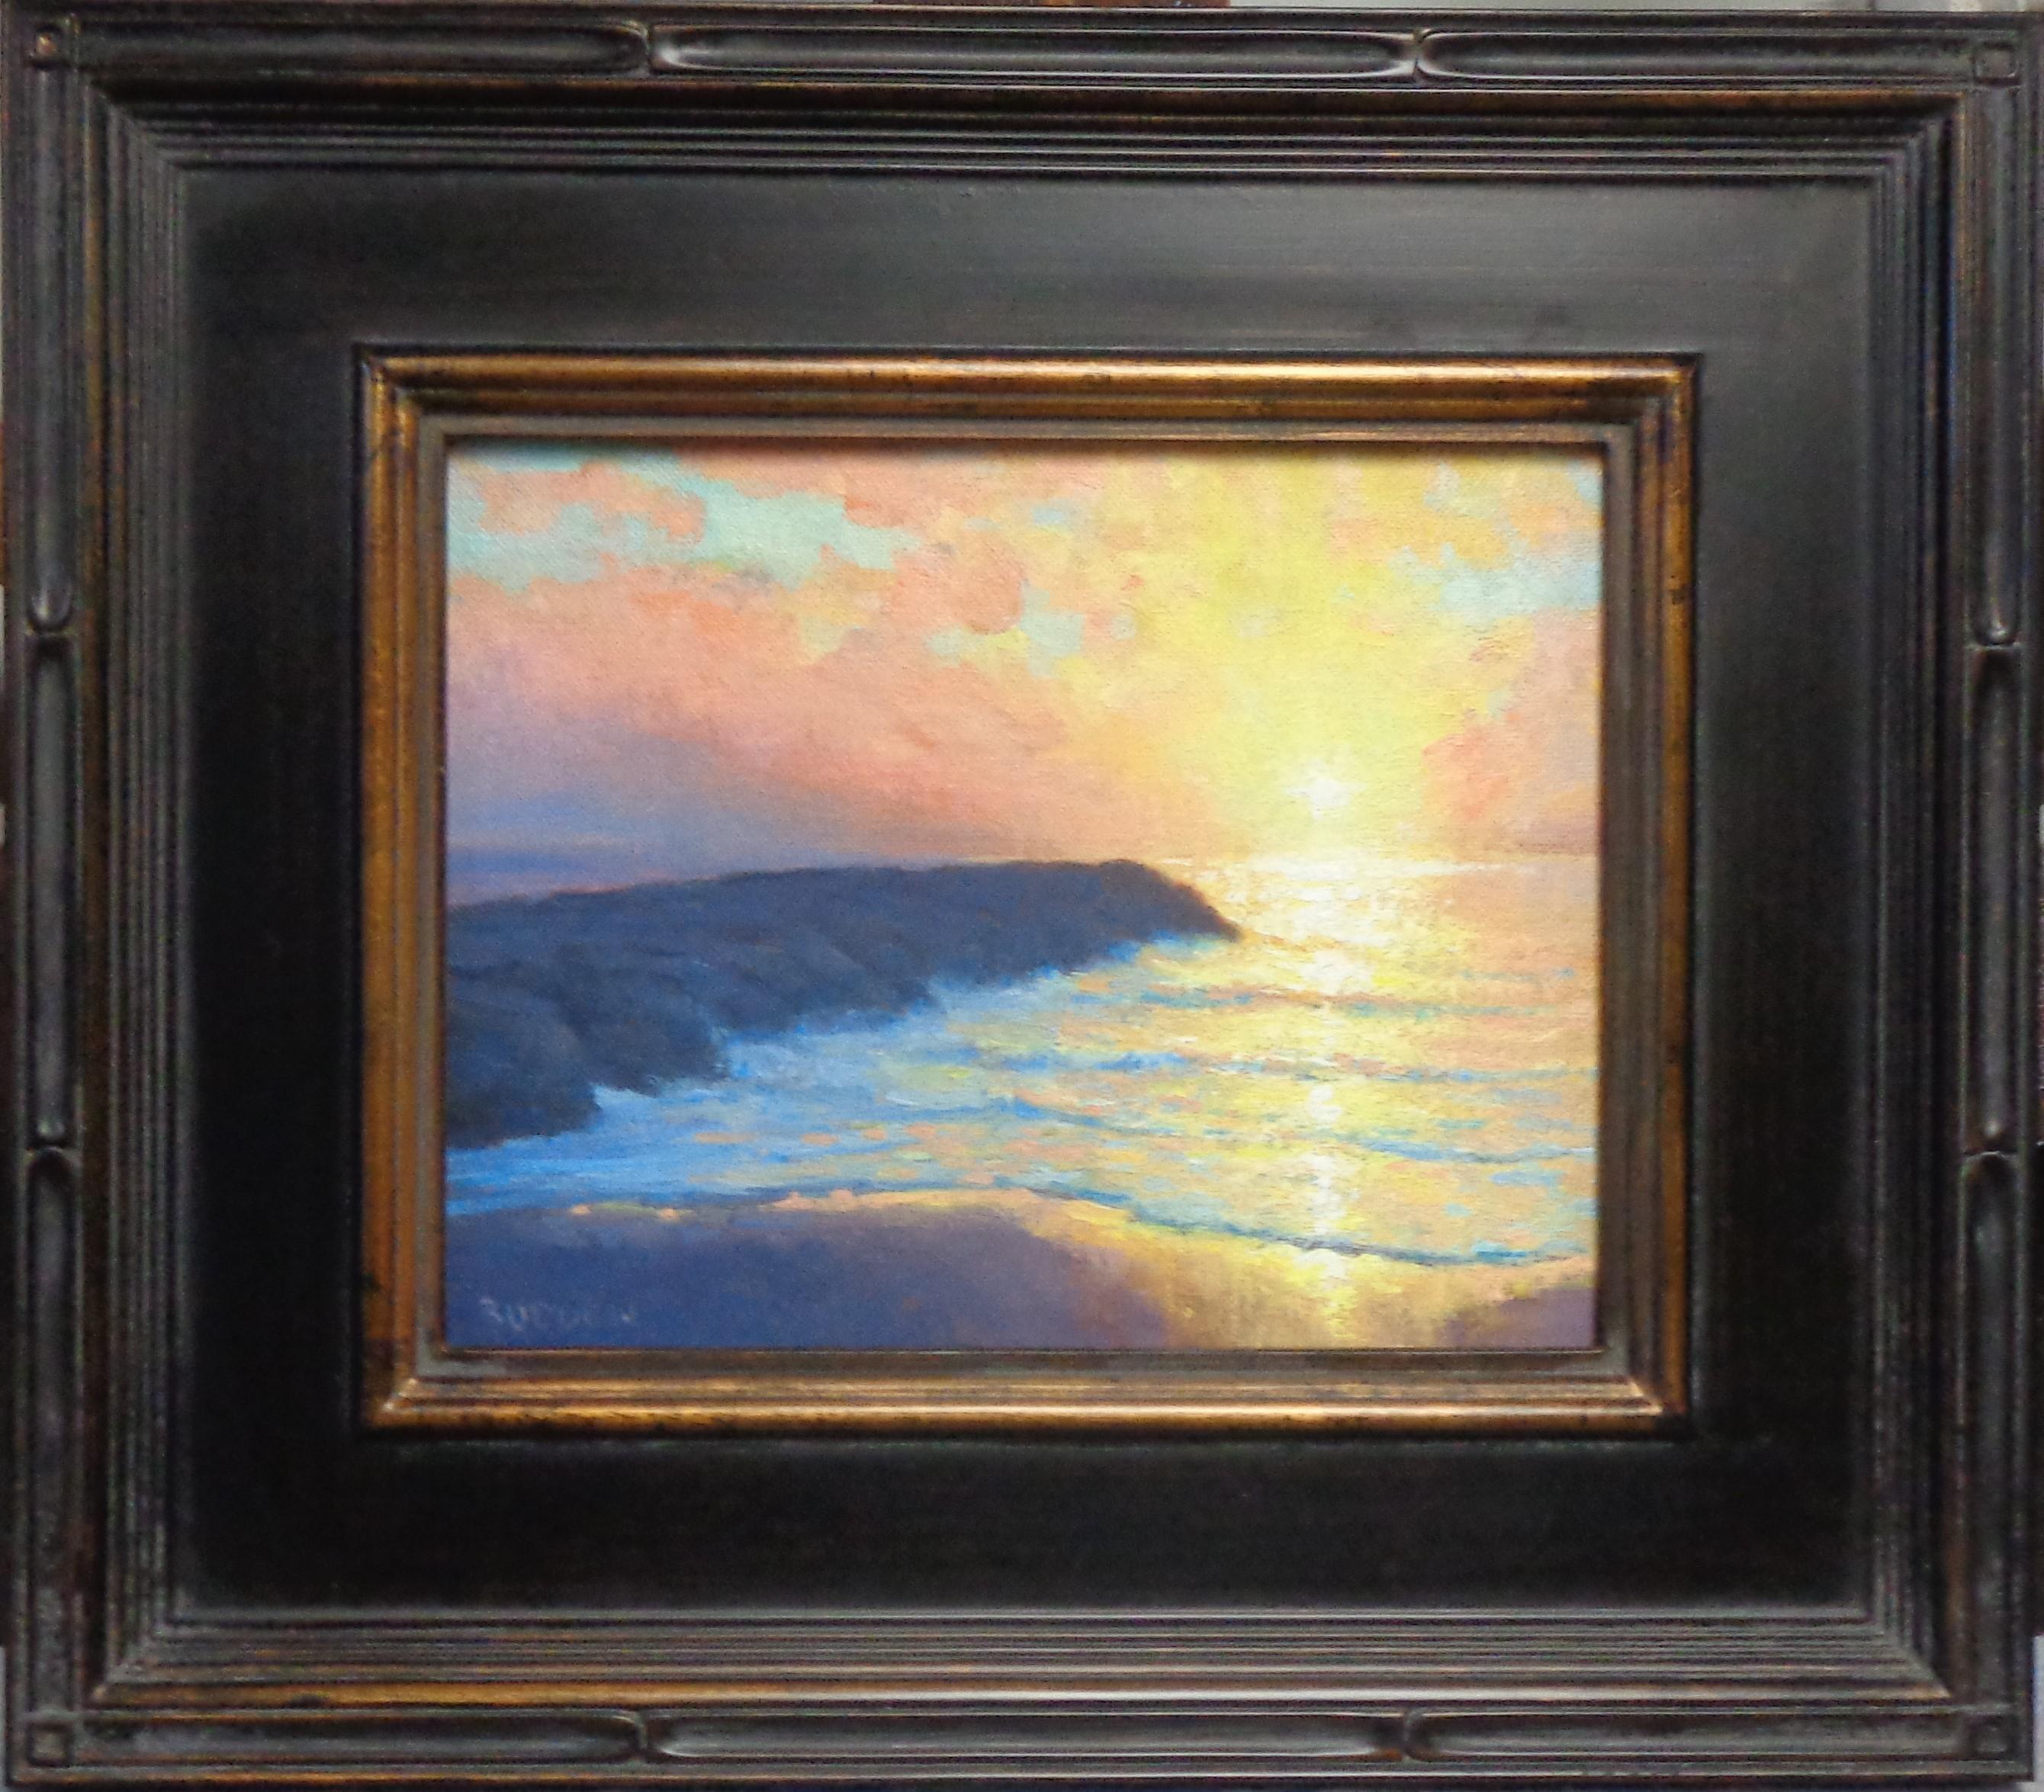 Sweet Sunrise
oil/panel
10 x 8 unframed, 14.25 x 16.25 framed
Sweet Sunrise is an oil painting on canvas by award winning contemporary artist Michael Budden that showcases a breath taking  sunrise over the water created in an impressionistic realism